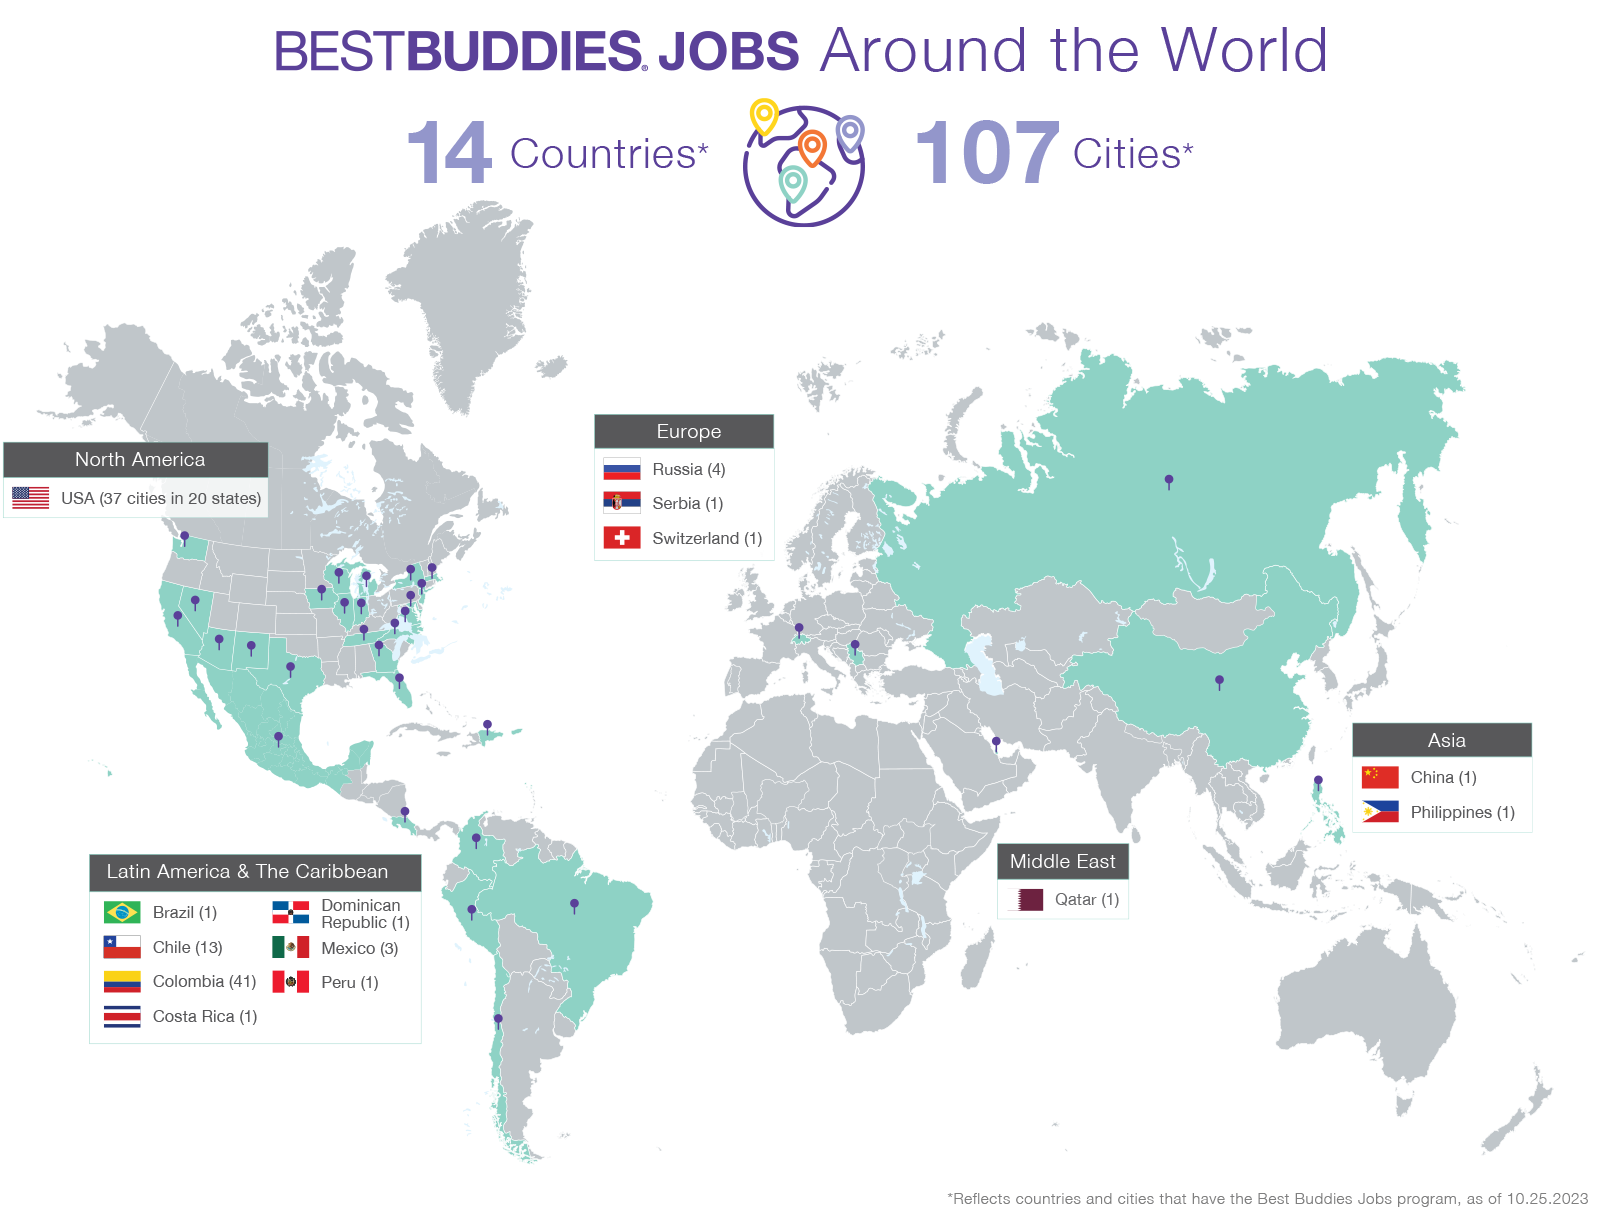 Best Buddies Jobs Around the World Map: 14 countries and 107 cities globally